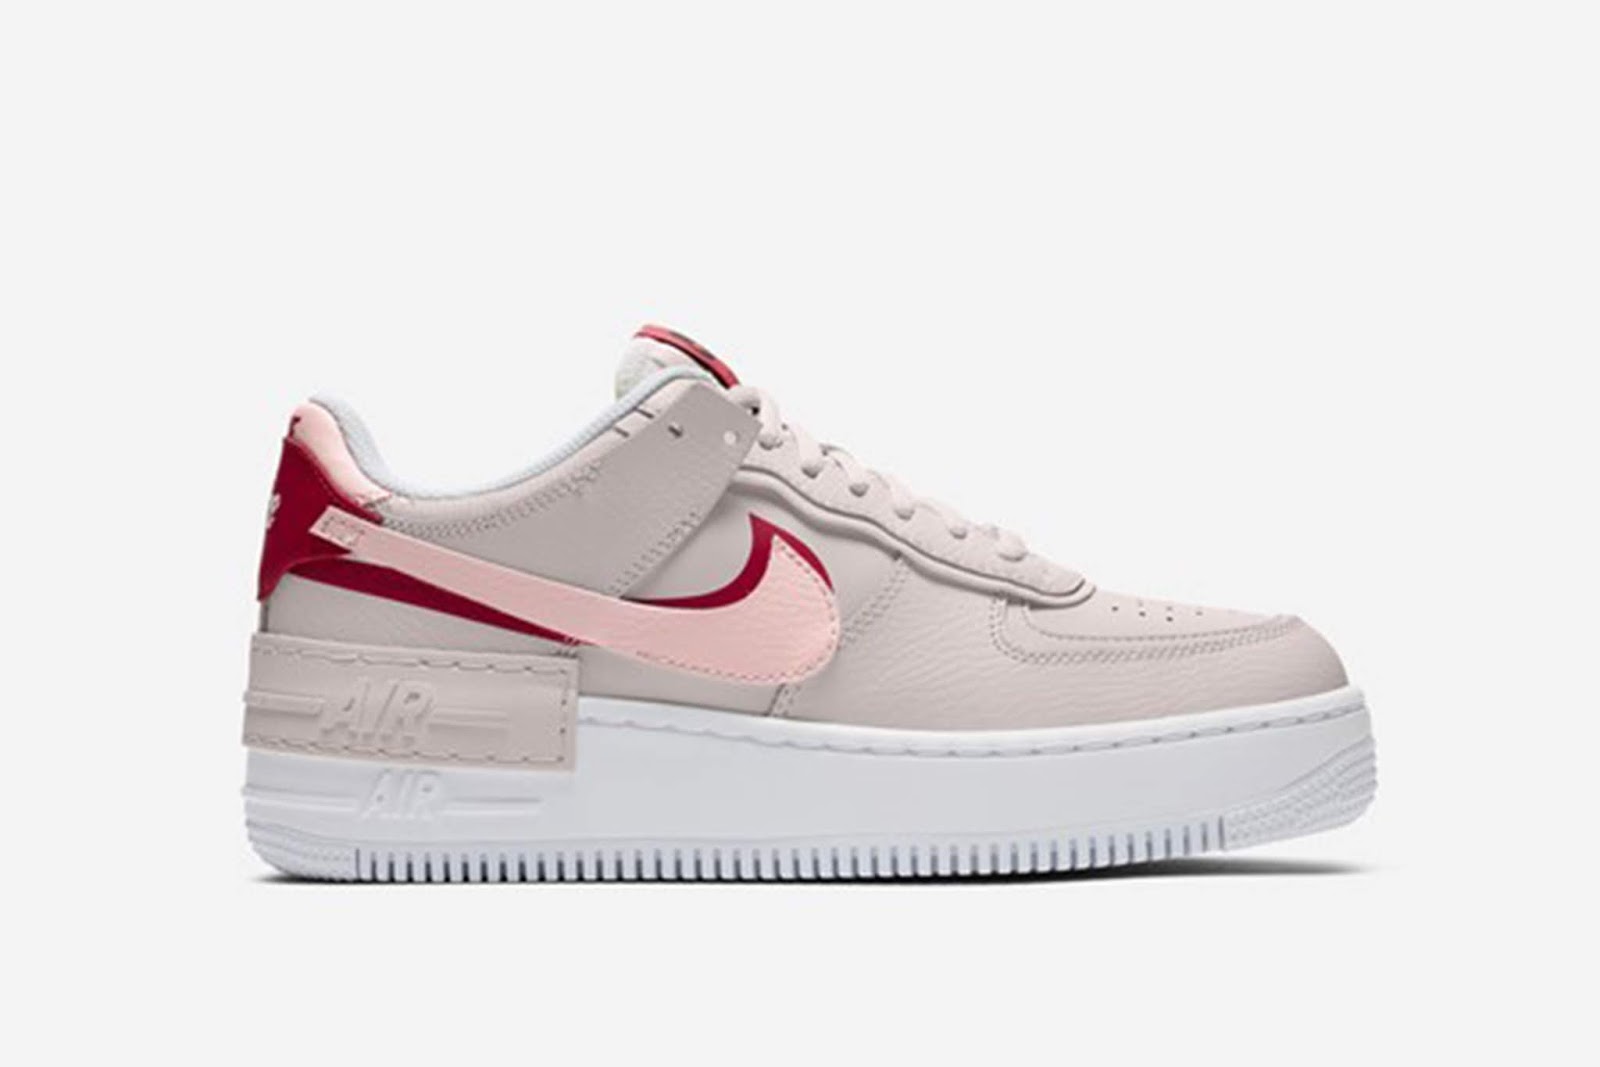 Swag Craze: First Look: The Nike WMNS Air Force 1 Shadow in Two Colourways